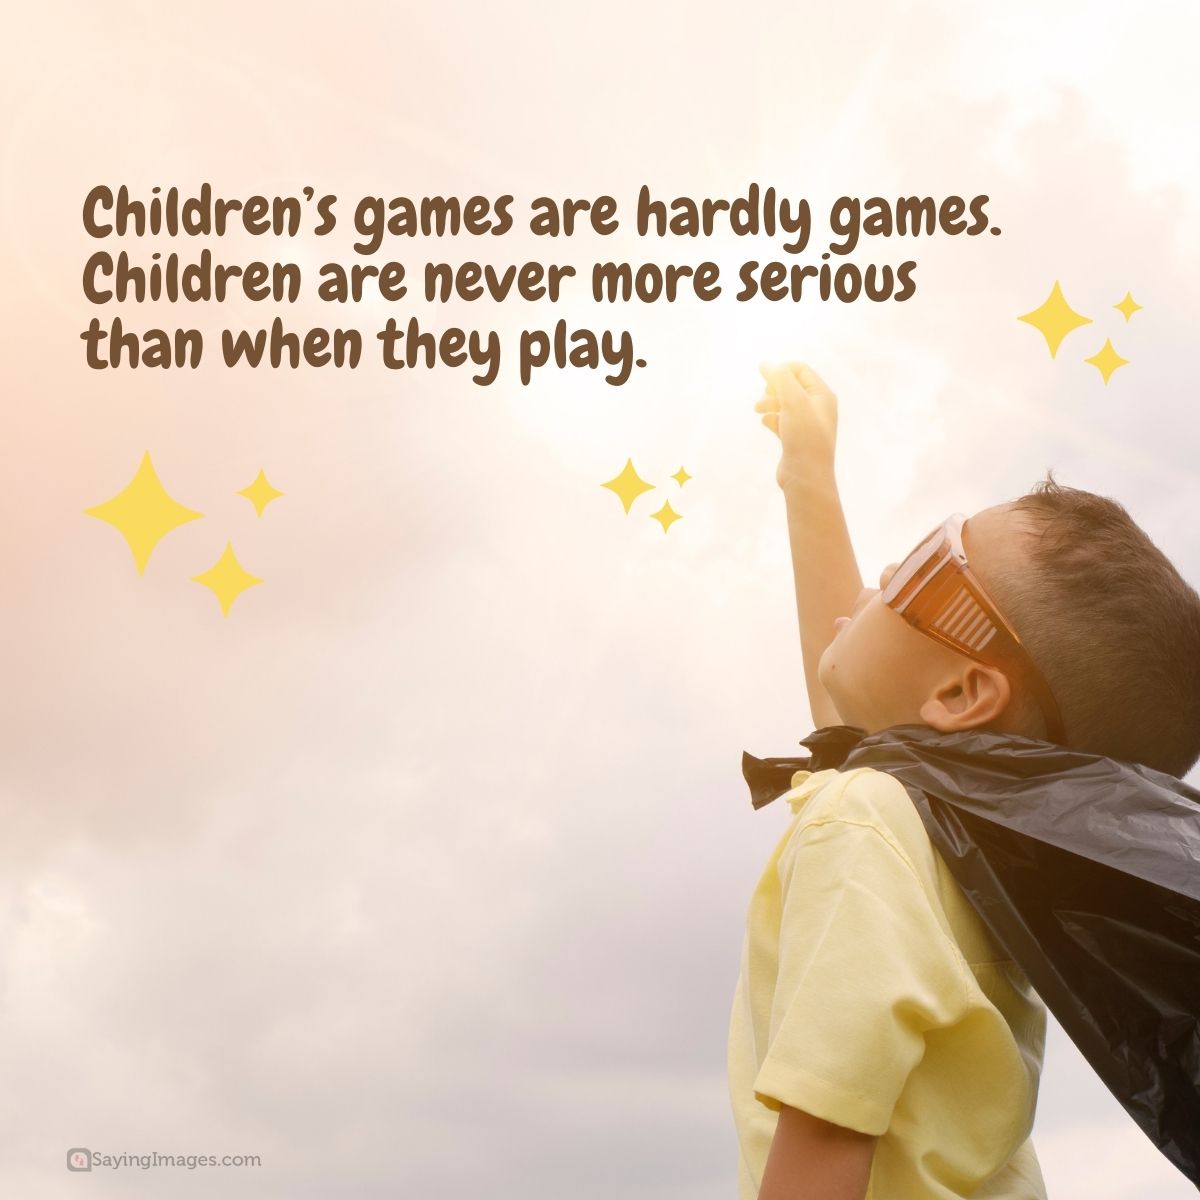 Childrens games are hardly games